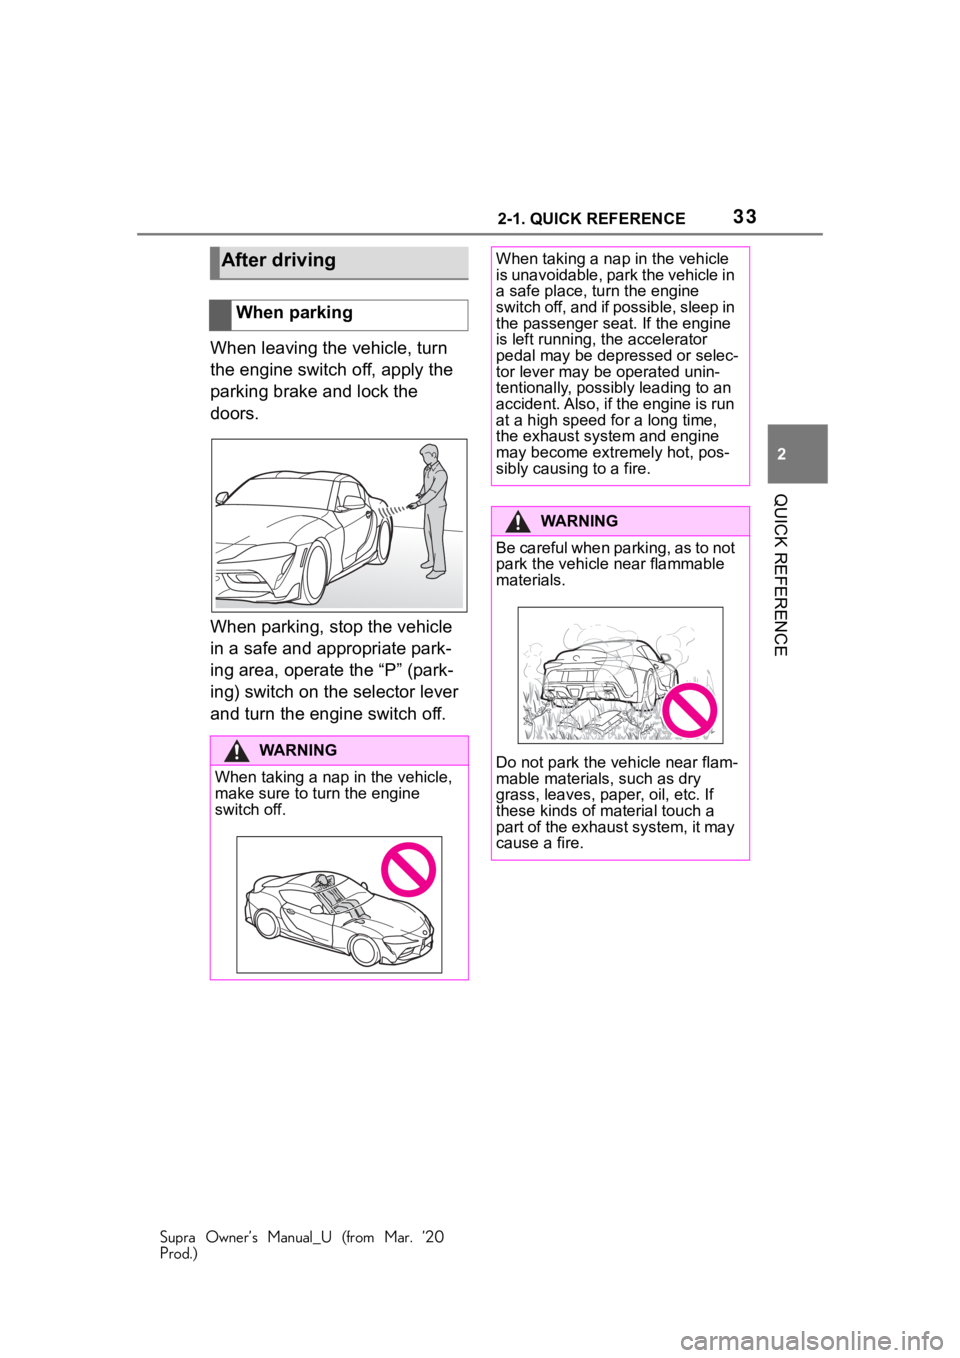 TOYOTA SUPRA 2021  Owners Manual (in English) 332-1. QUICK REFERENCE
Supra Owner’s Manual_U (from Mar. ’20
Prod.)
2
QUICK REFERENCE
When leaving the vehicle, turn 
the engine switch off, apply the 
parking brake and lock the 
doors.
When park